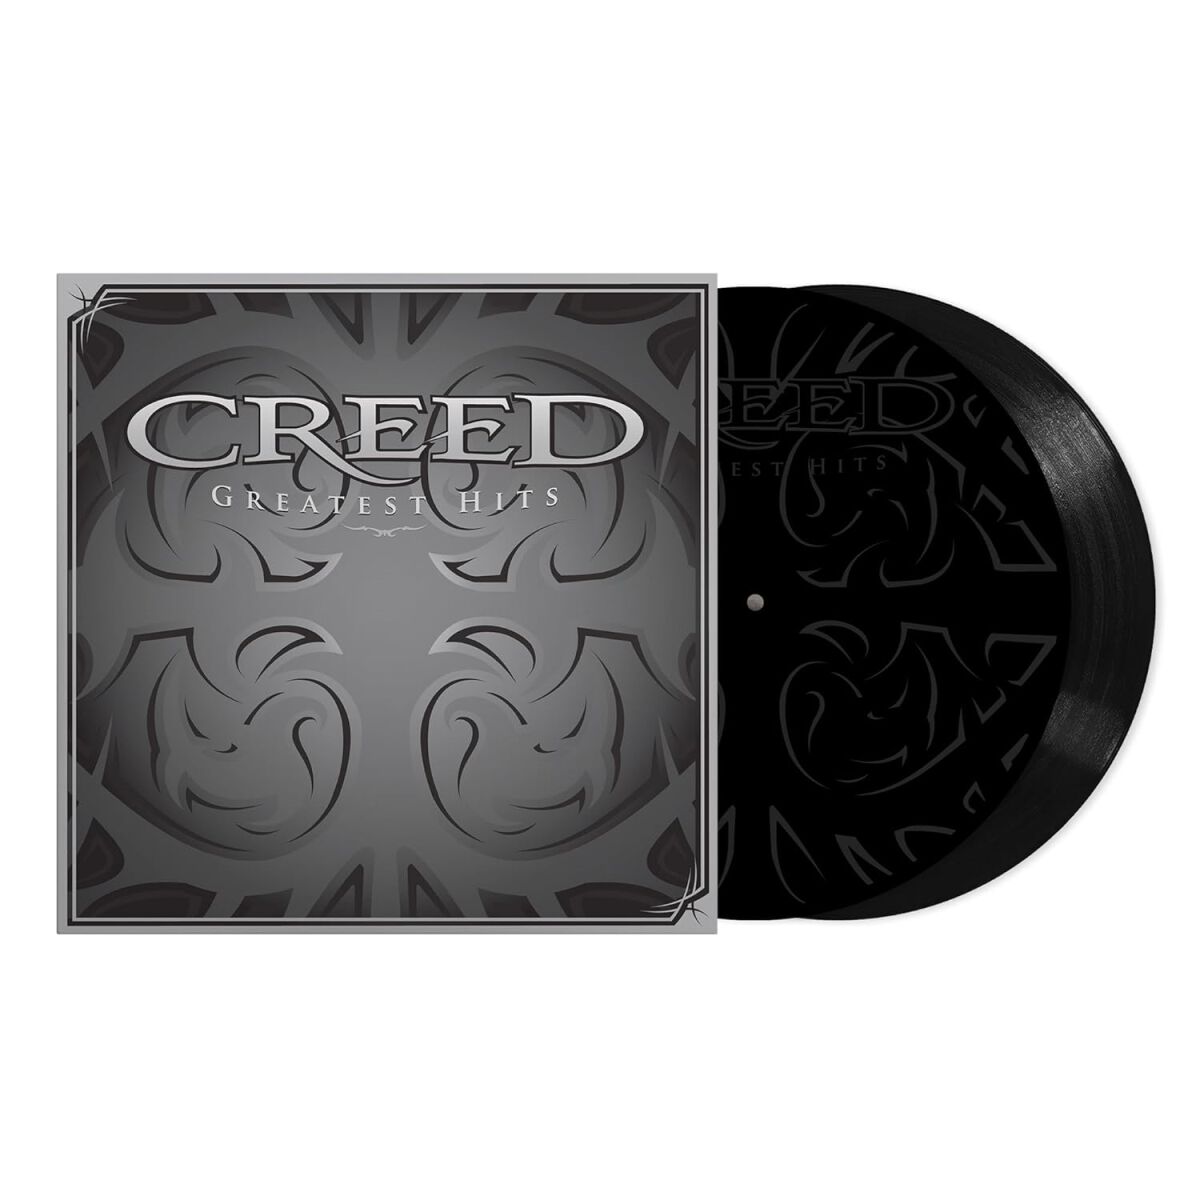 Creed Greatest hits LP multicolor von CREED